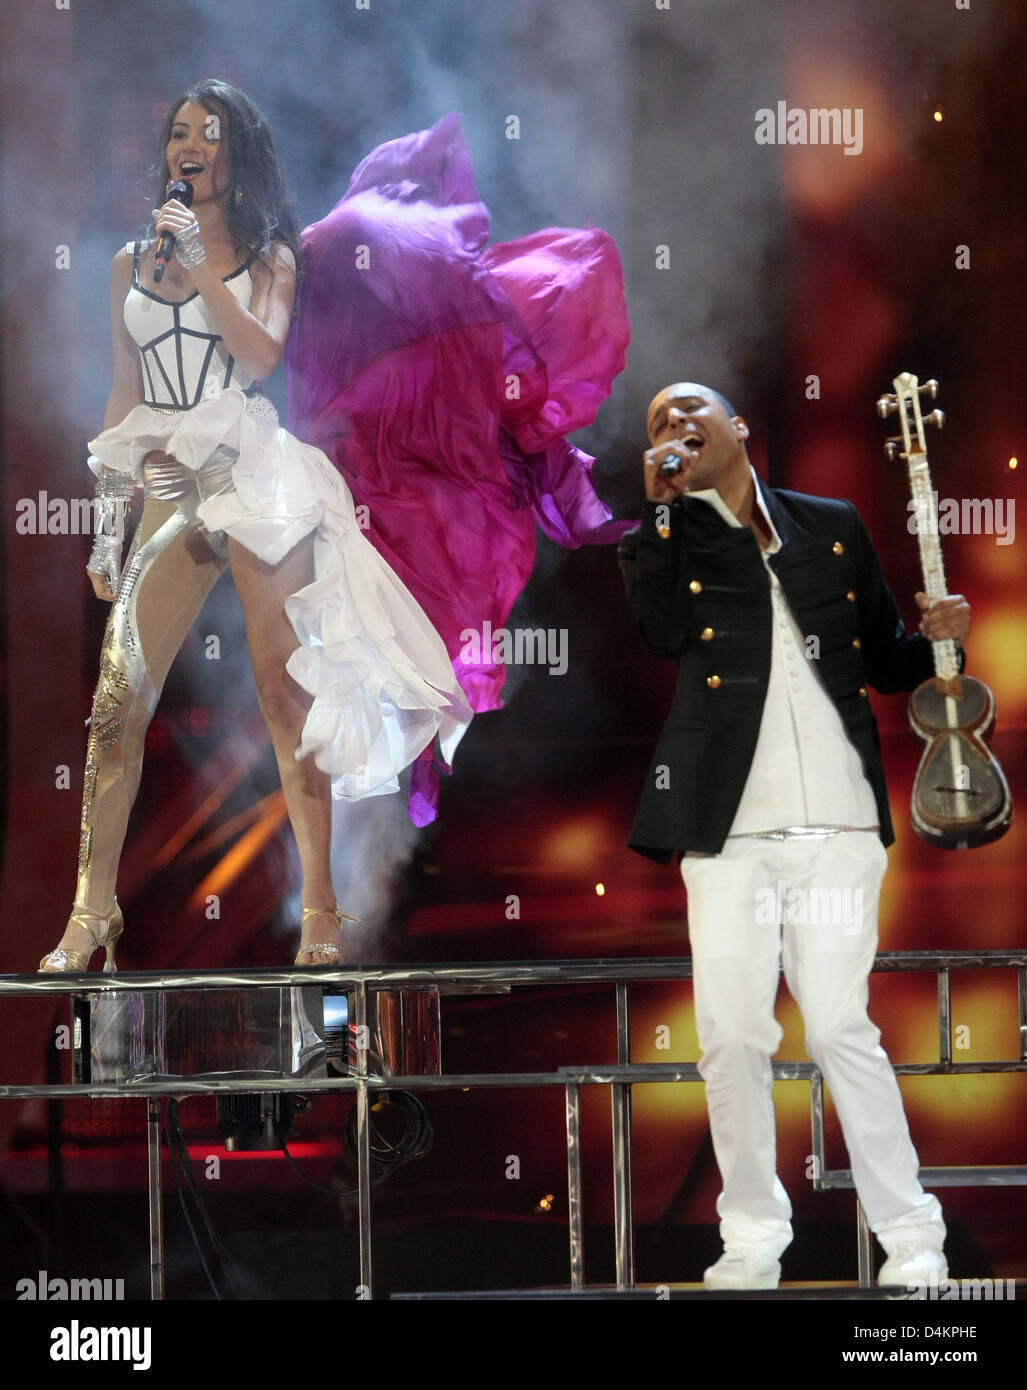 AySel & Arash, representing Azerbaijan in the 2009 Eurovision Song Contest, perform the song ?Always? during dress rehearsal in Moscow, Russia, 15 May 2009. The 54th Eurovision Song Contest takes place on 16 May. Photo: Ulrich Perrey Stock Photo